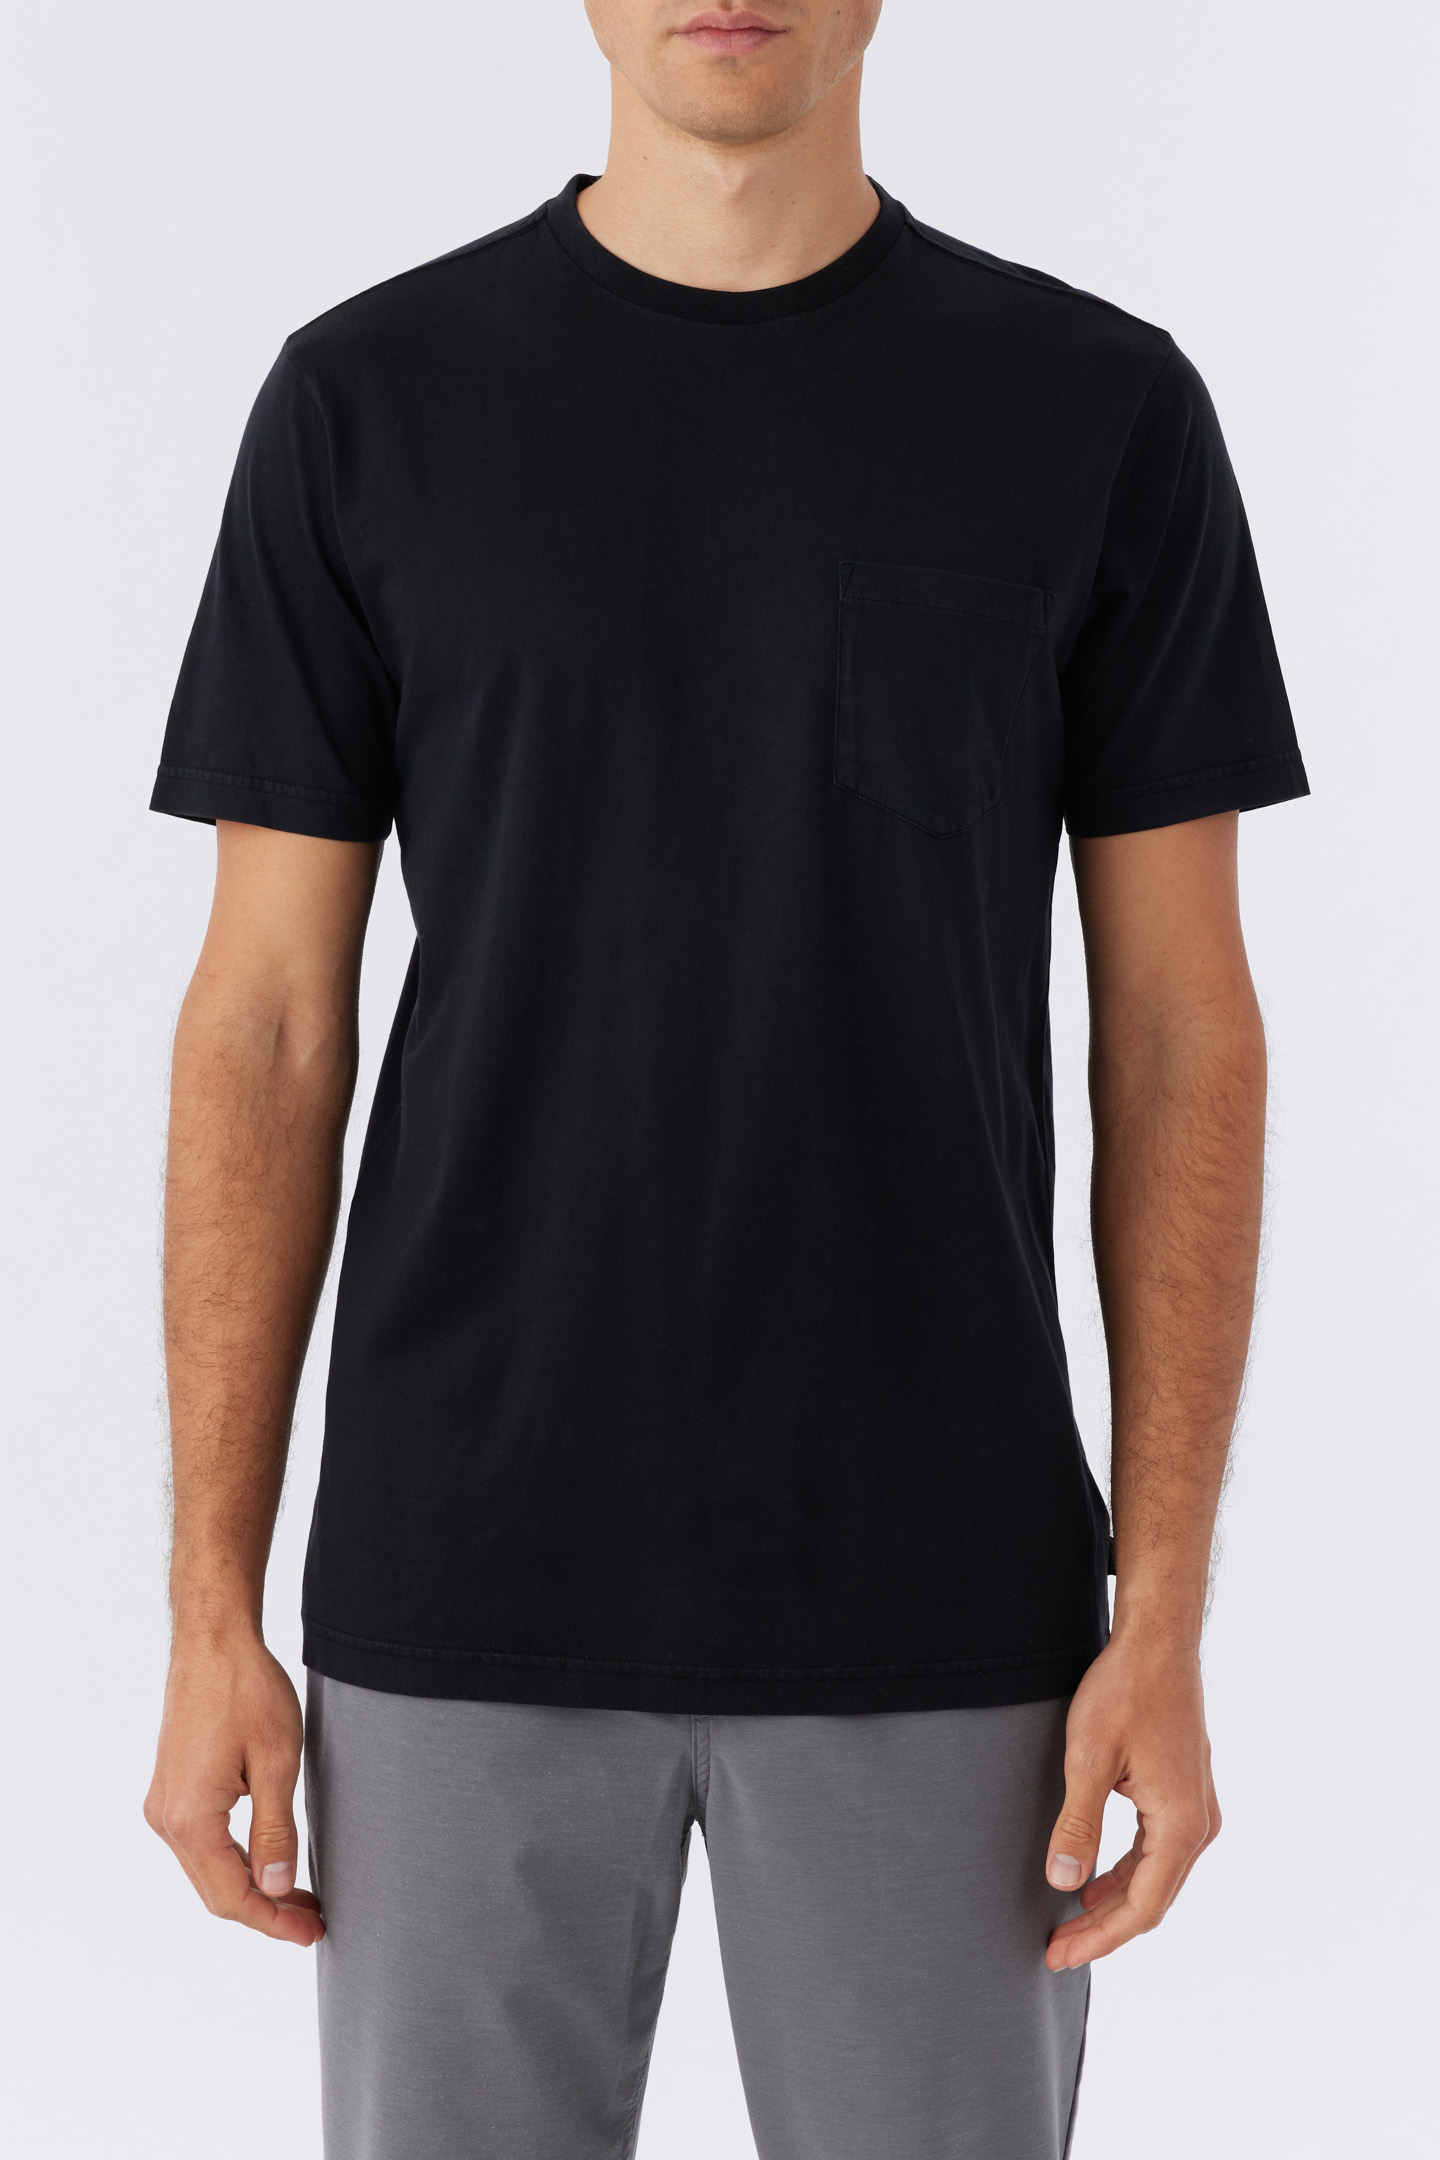 East Cliff Hang Tee | Out O\'Neill Black 